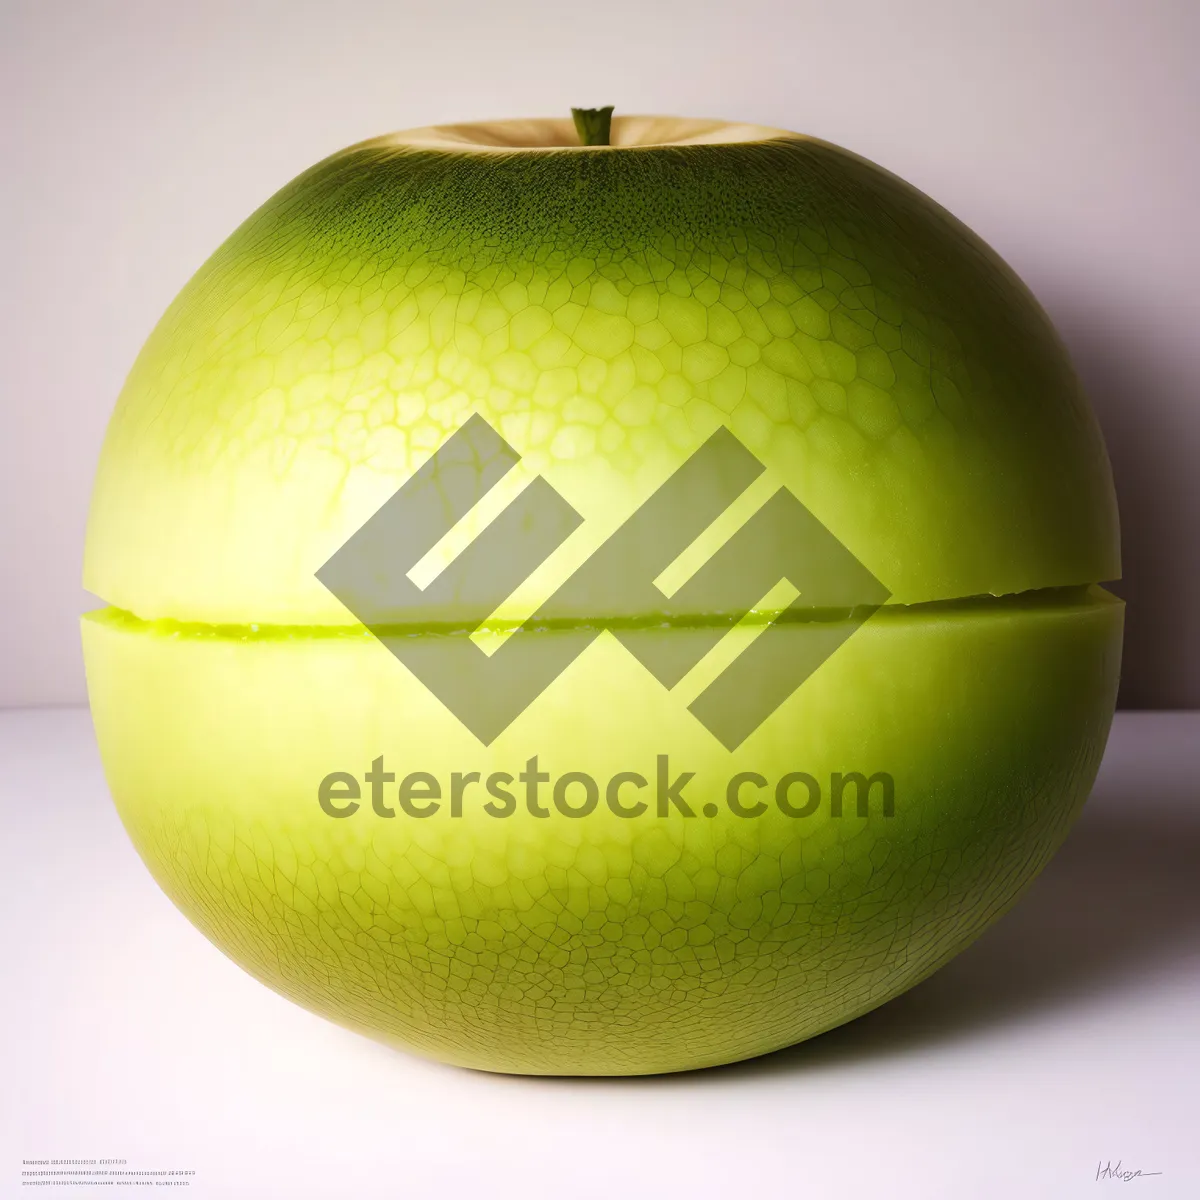 Picture of Delicious Golden Apple - Nutritious and Refreshing Fruit